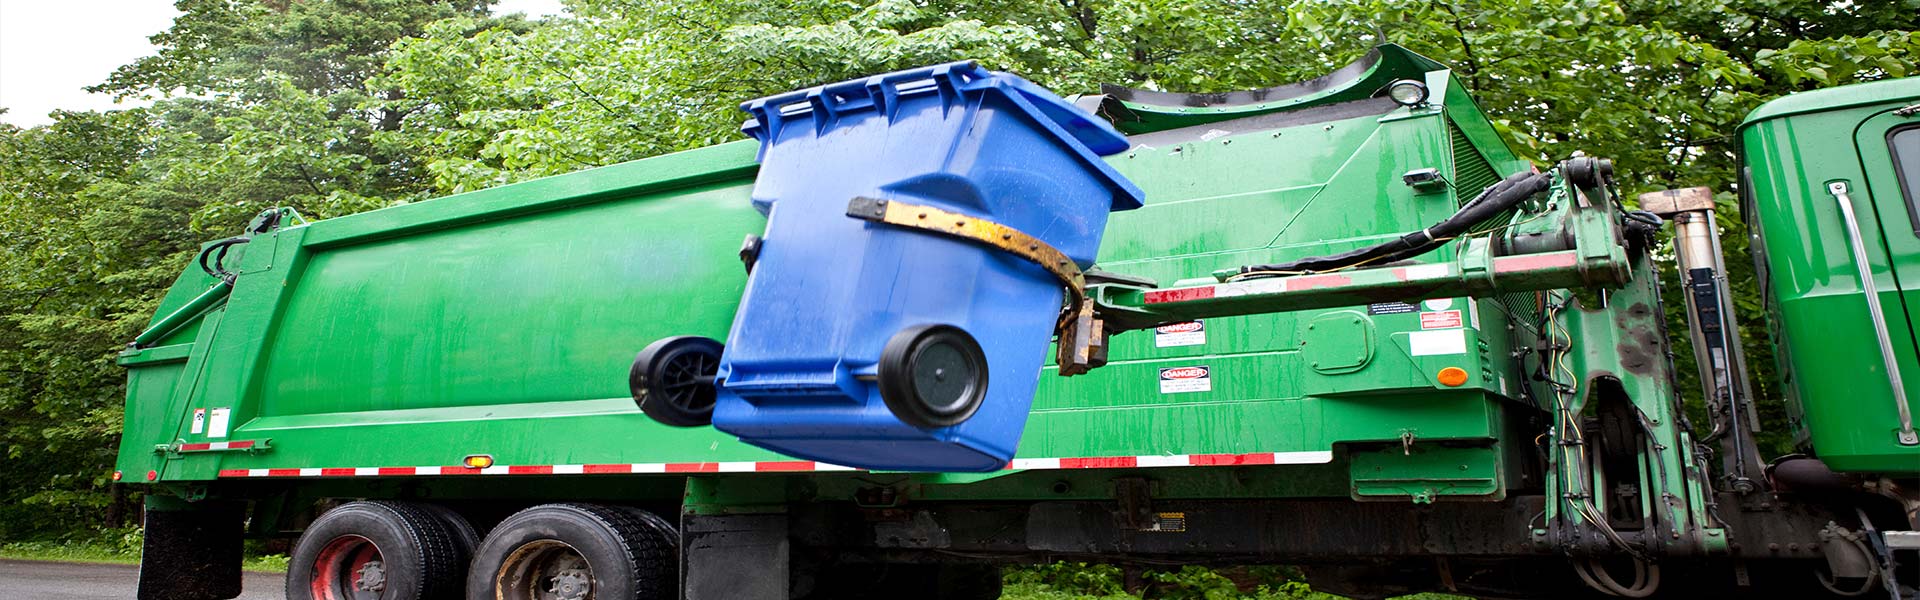 Residential Waste Removal Services